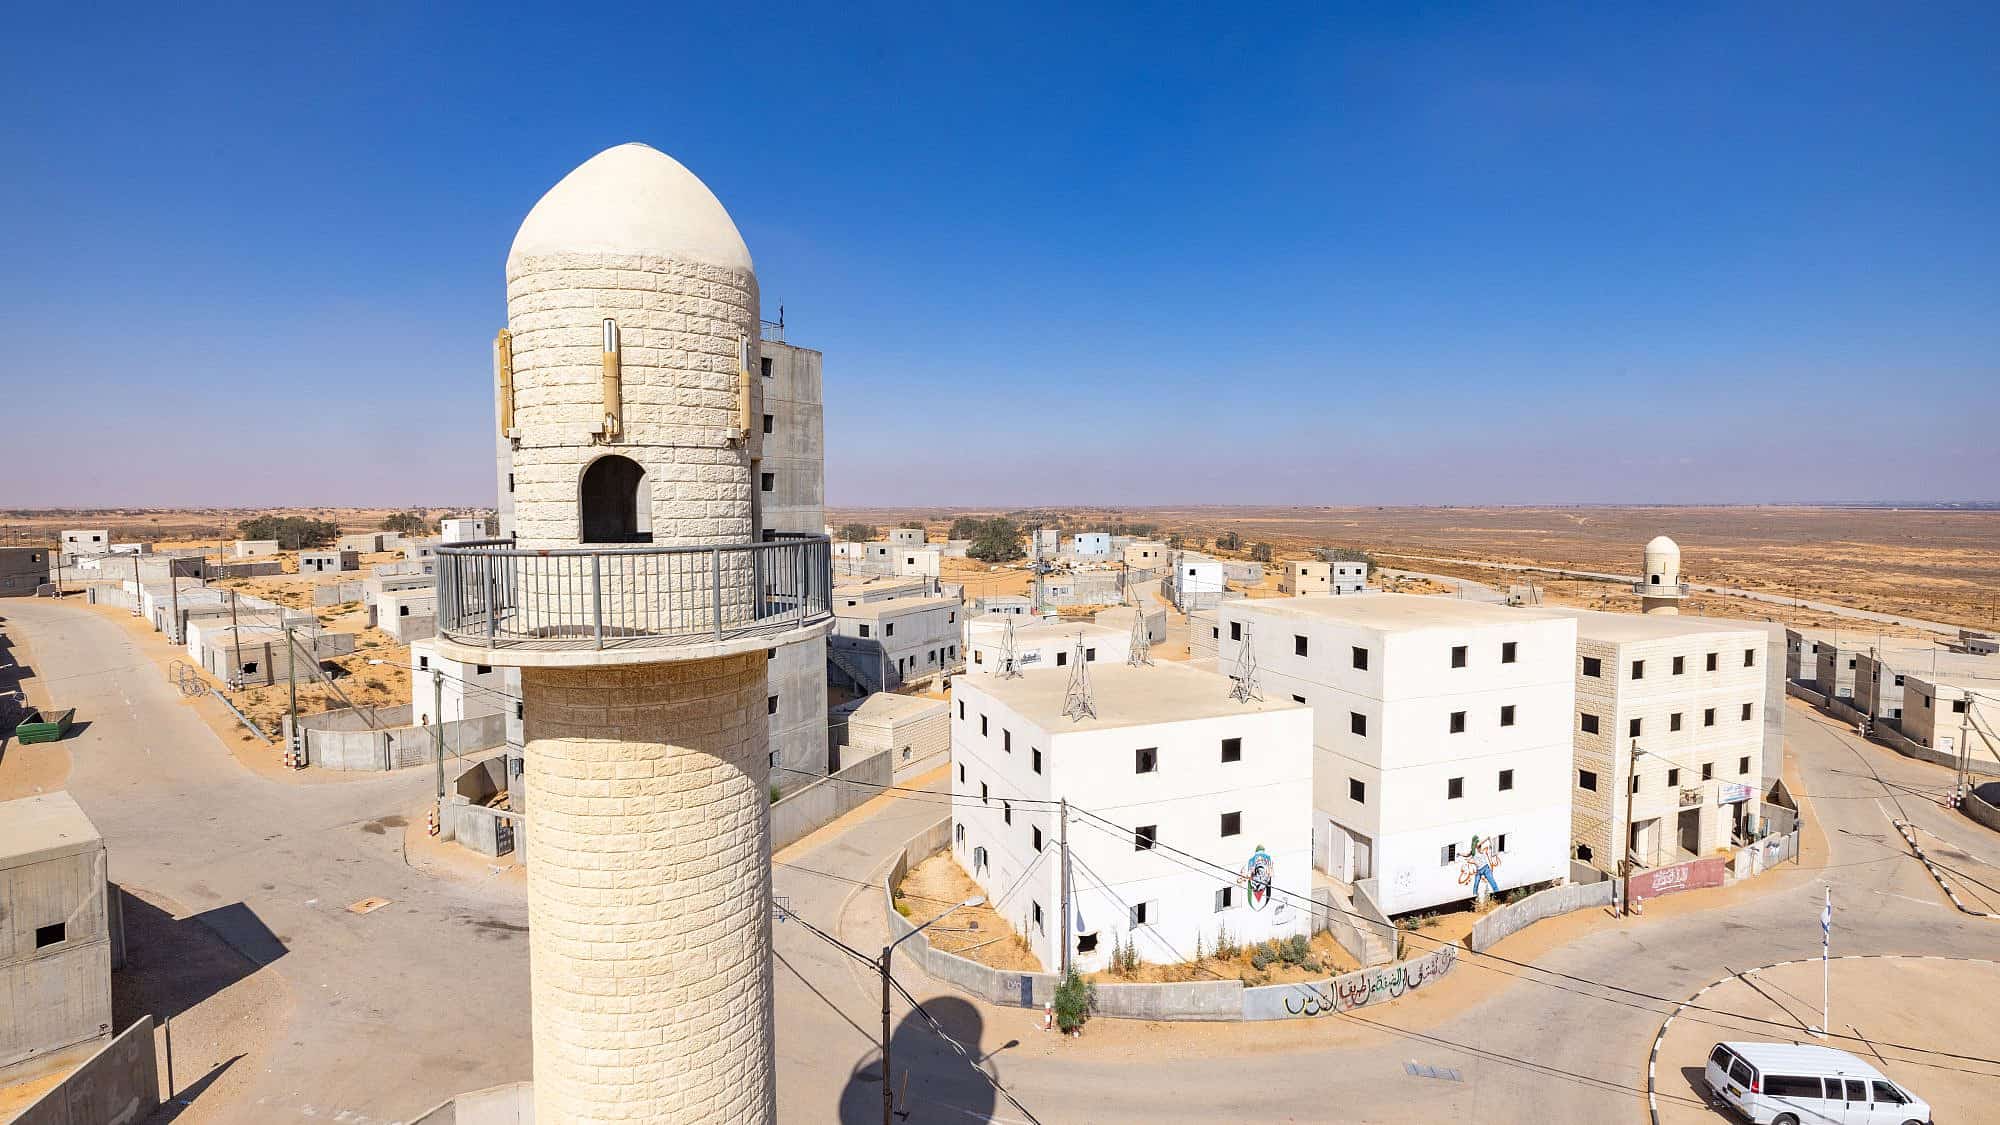 The IDF's Urban Warfare Training Center at the Tze'elim base in the western Negev, June 30, 2022.  Photo by Nati Shohat/Flash90.